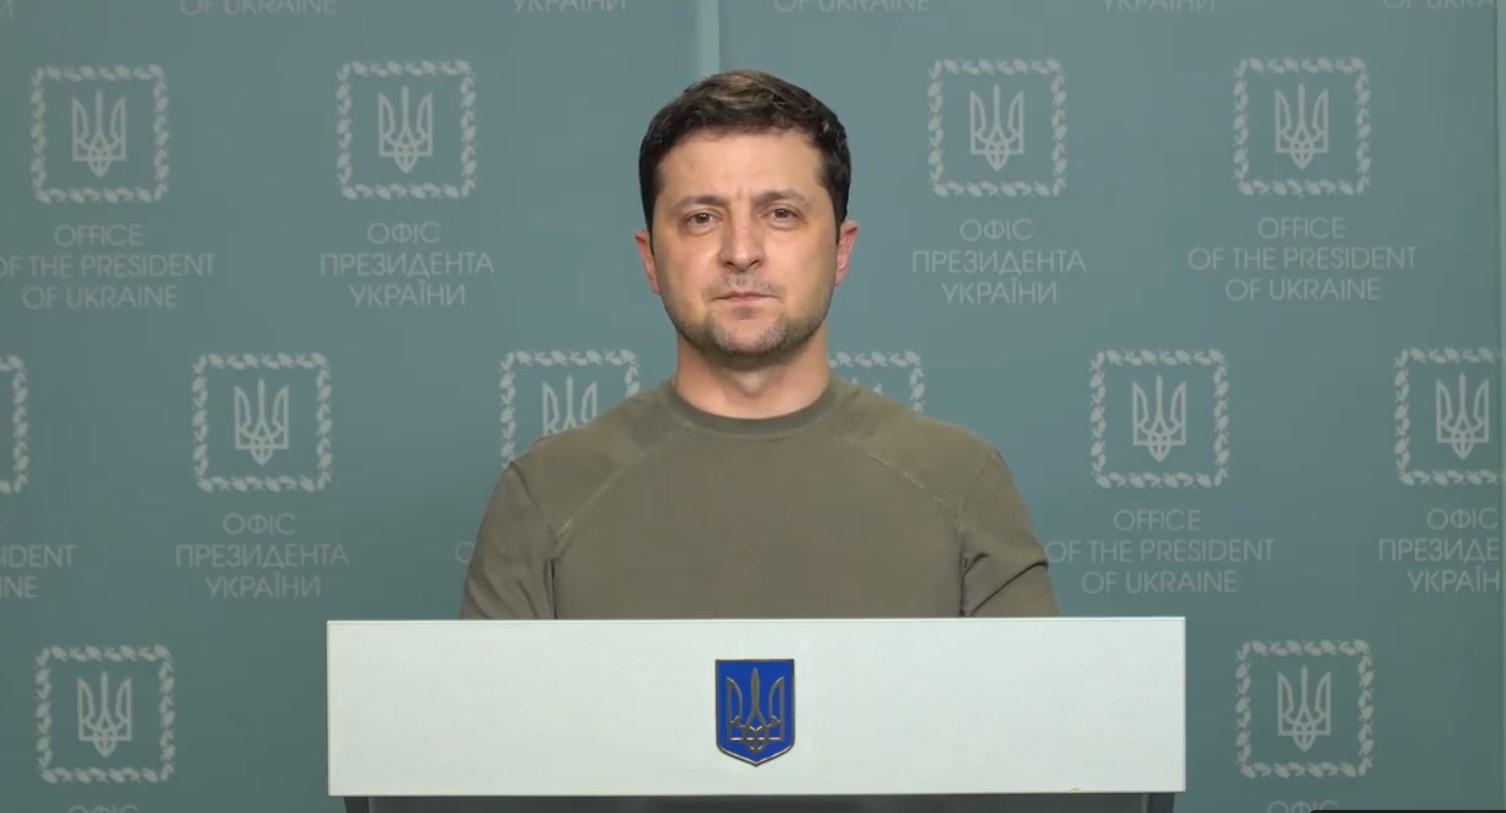 Target number one & Ukraine in NATO: Volodymyr Zelensky speech at the end of the first day of Russia's attacks